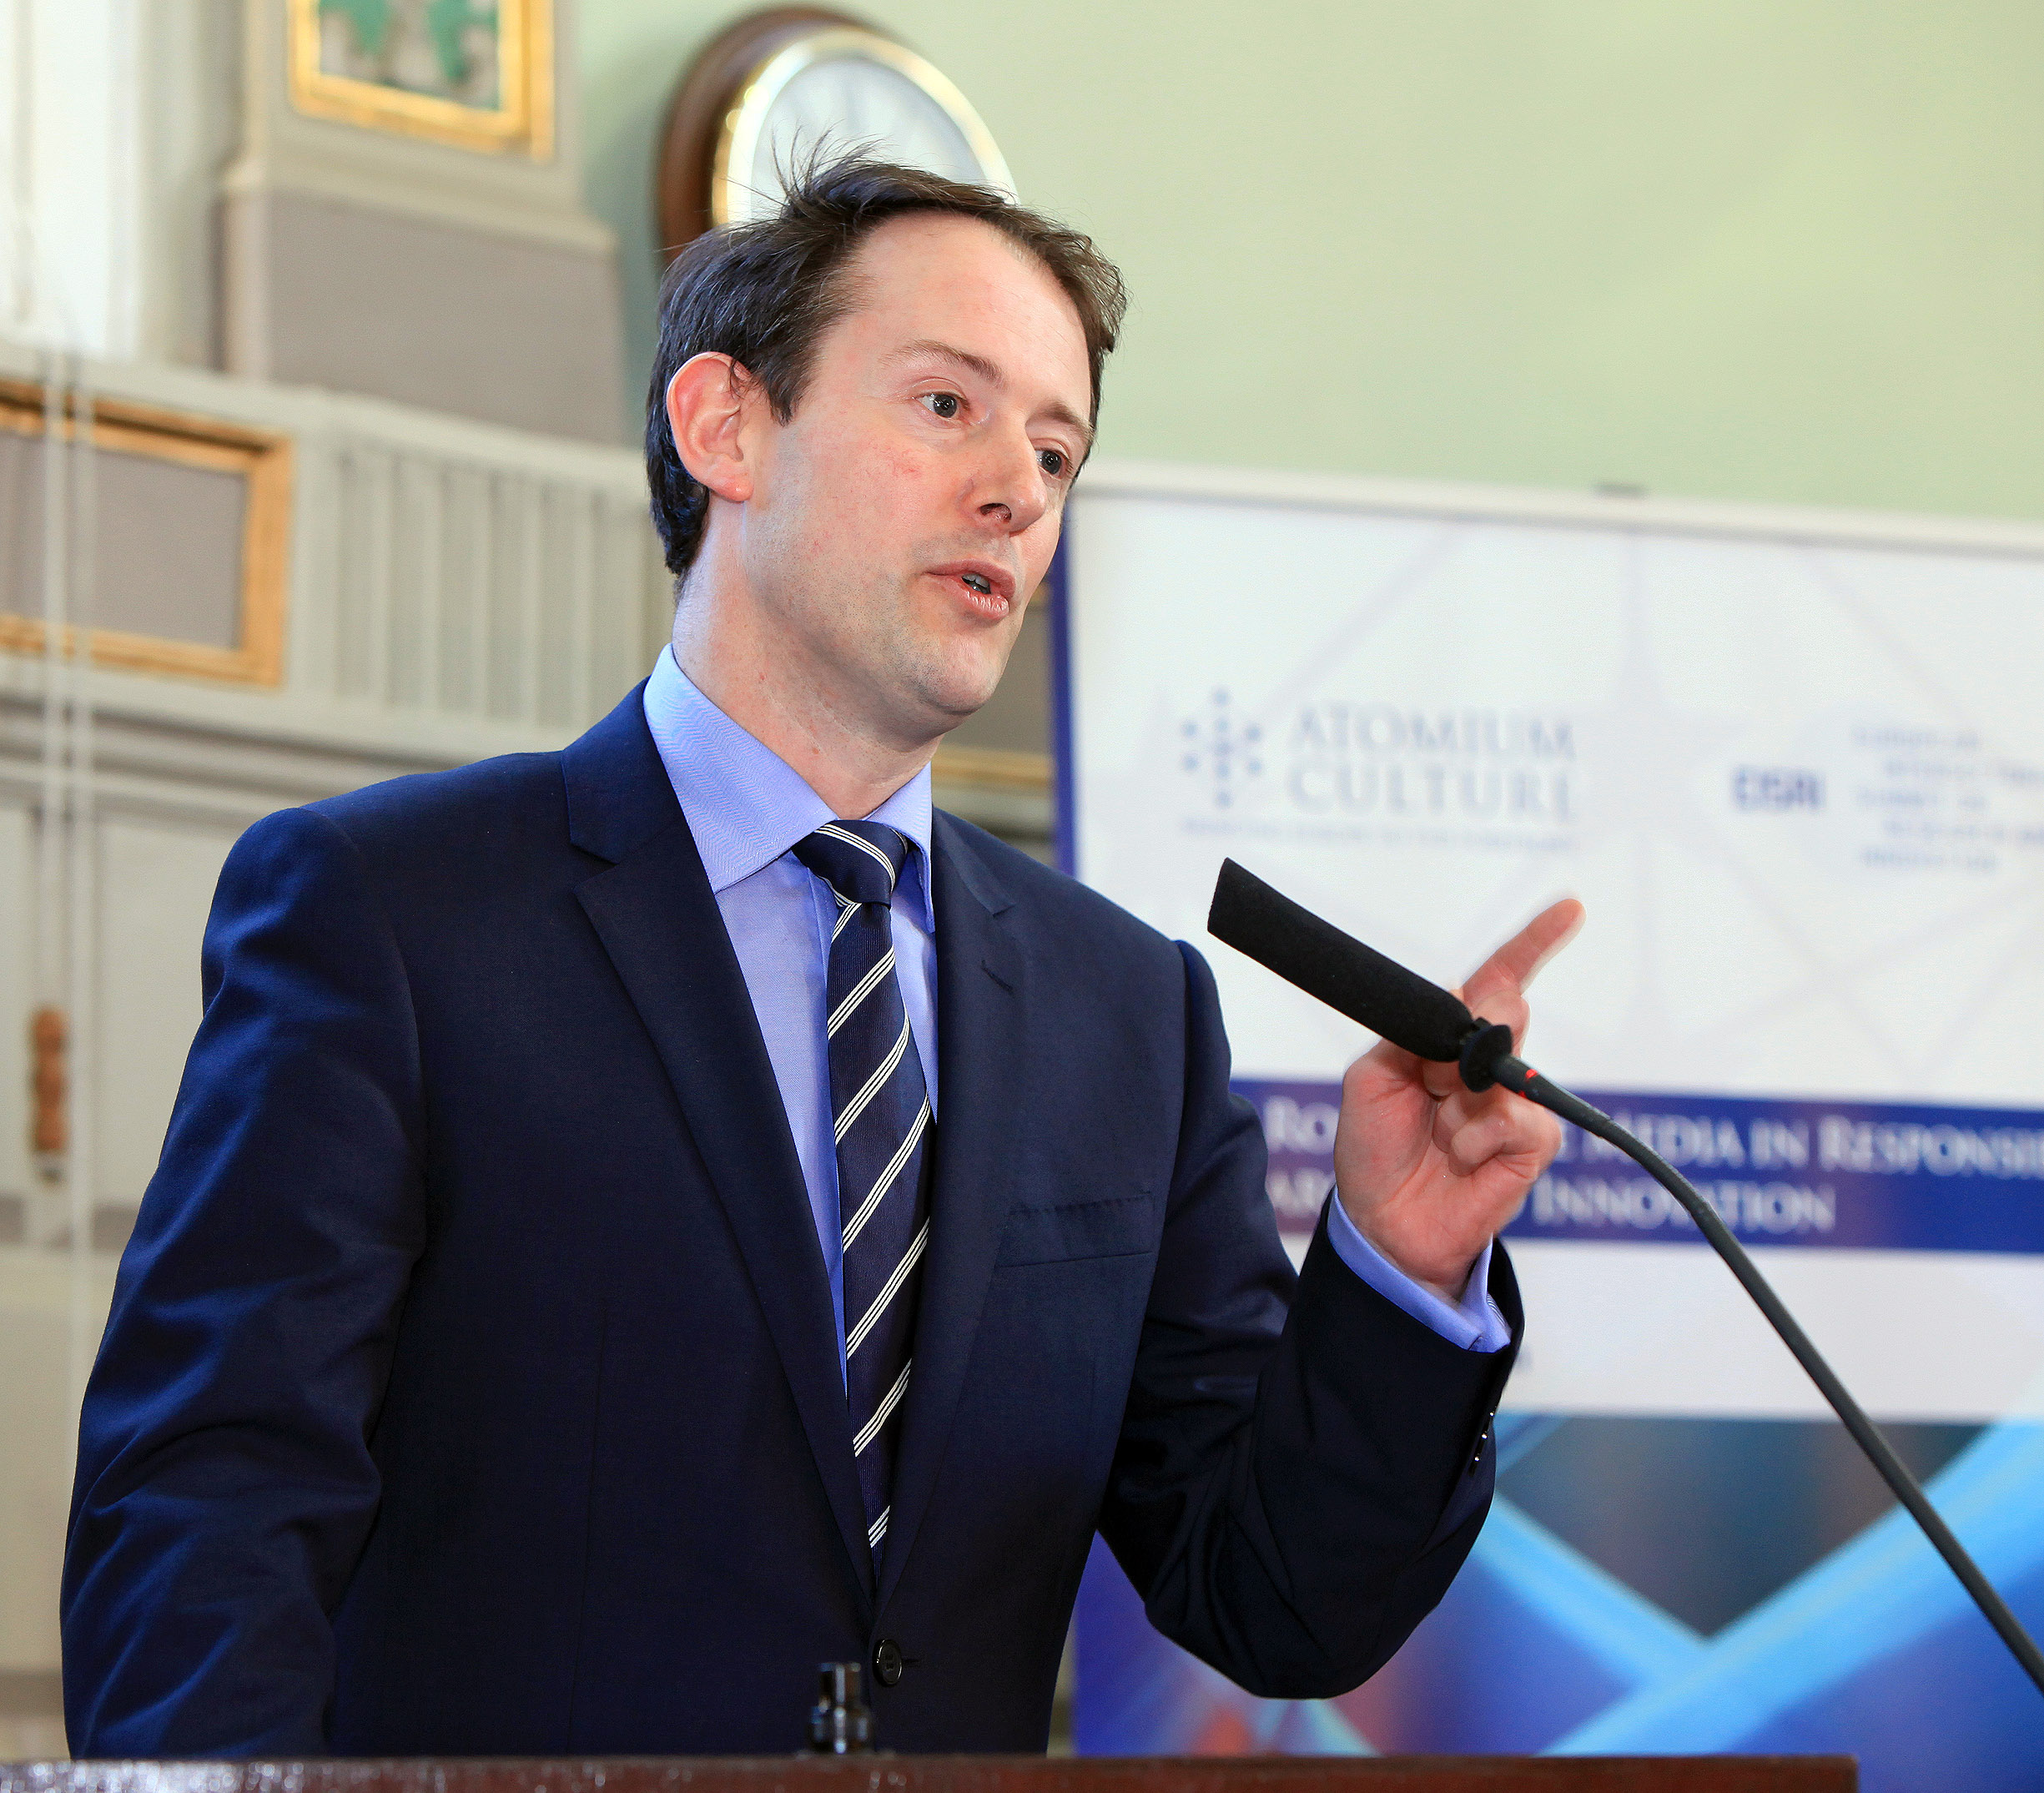 Mr. Sean Sherlock, Minister of State for Research and Innovation